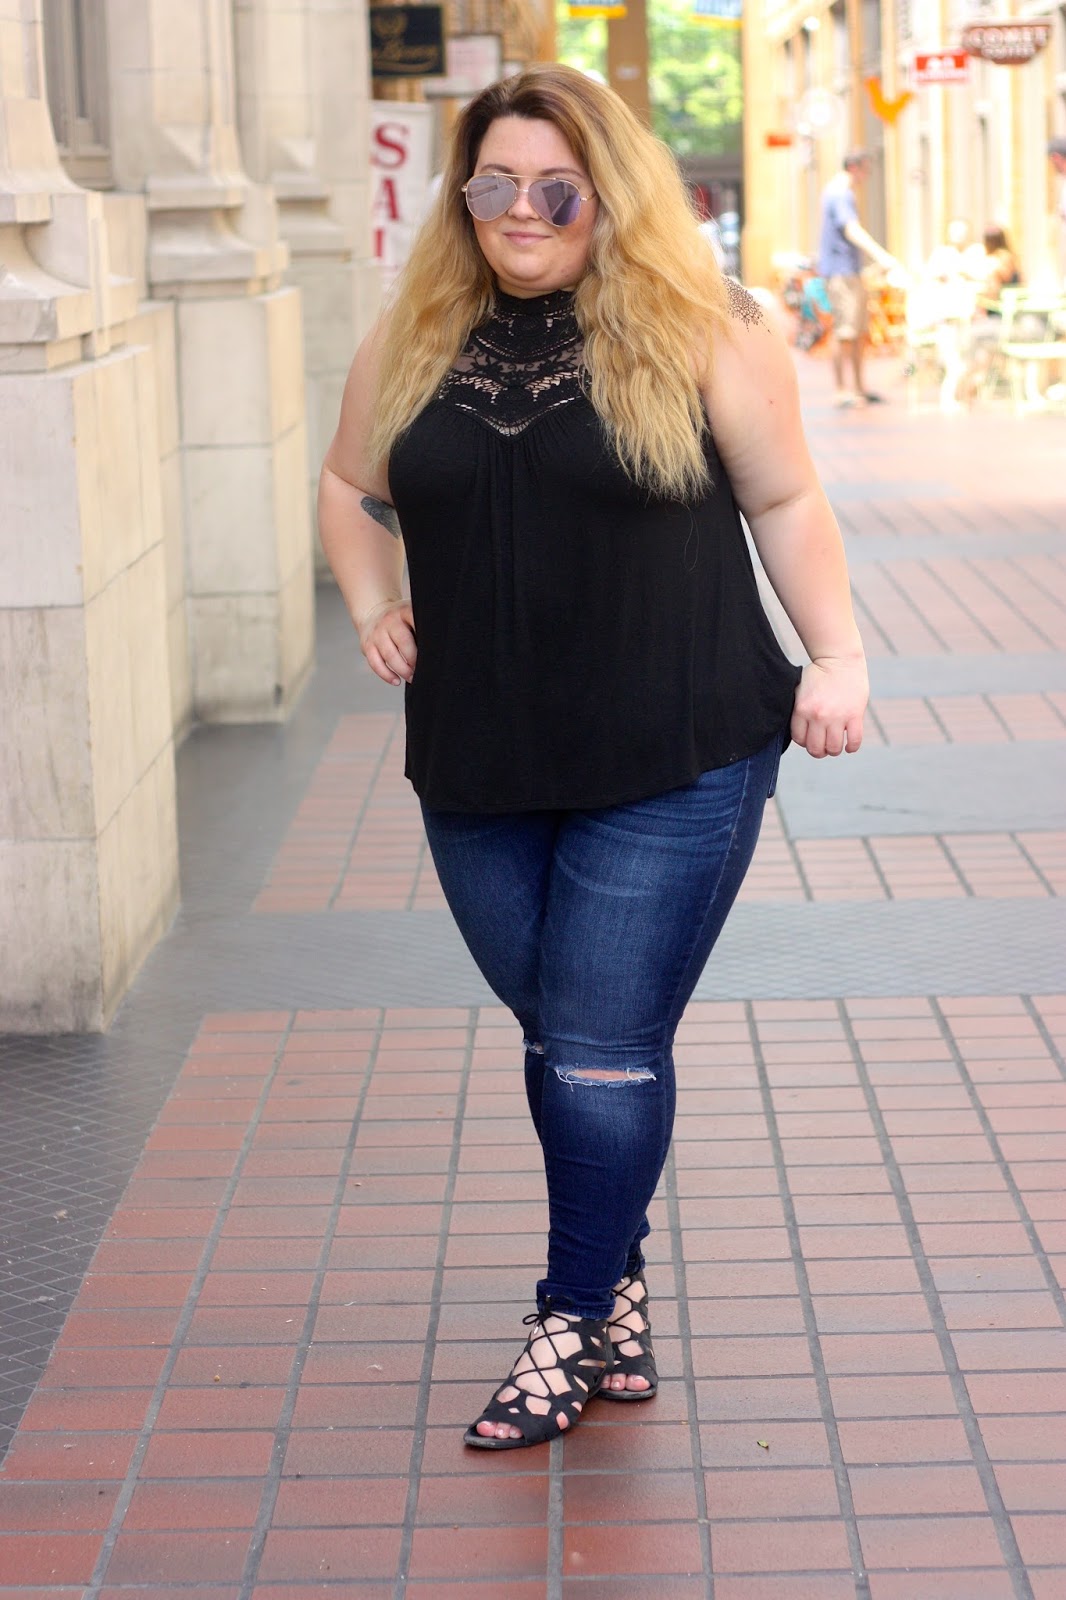 vacation style, summer style, plus size fashion, plus size fashion blogger, natalie craig, natalie in the city, ann arbor michigan, crochet tank top, ripped jeans, franco sarto sandals, girls with tattoos, natural hair, mirror aviator sunglasses pink